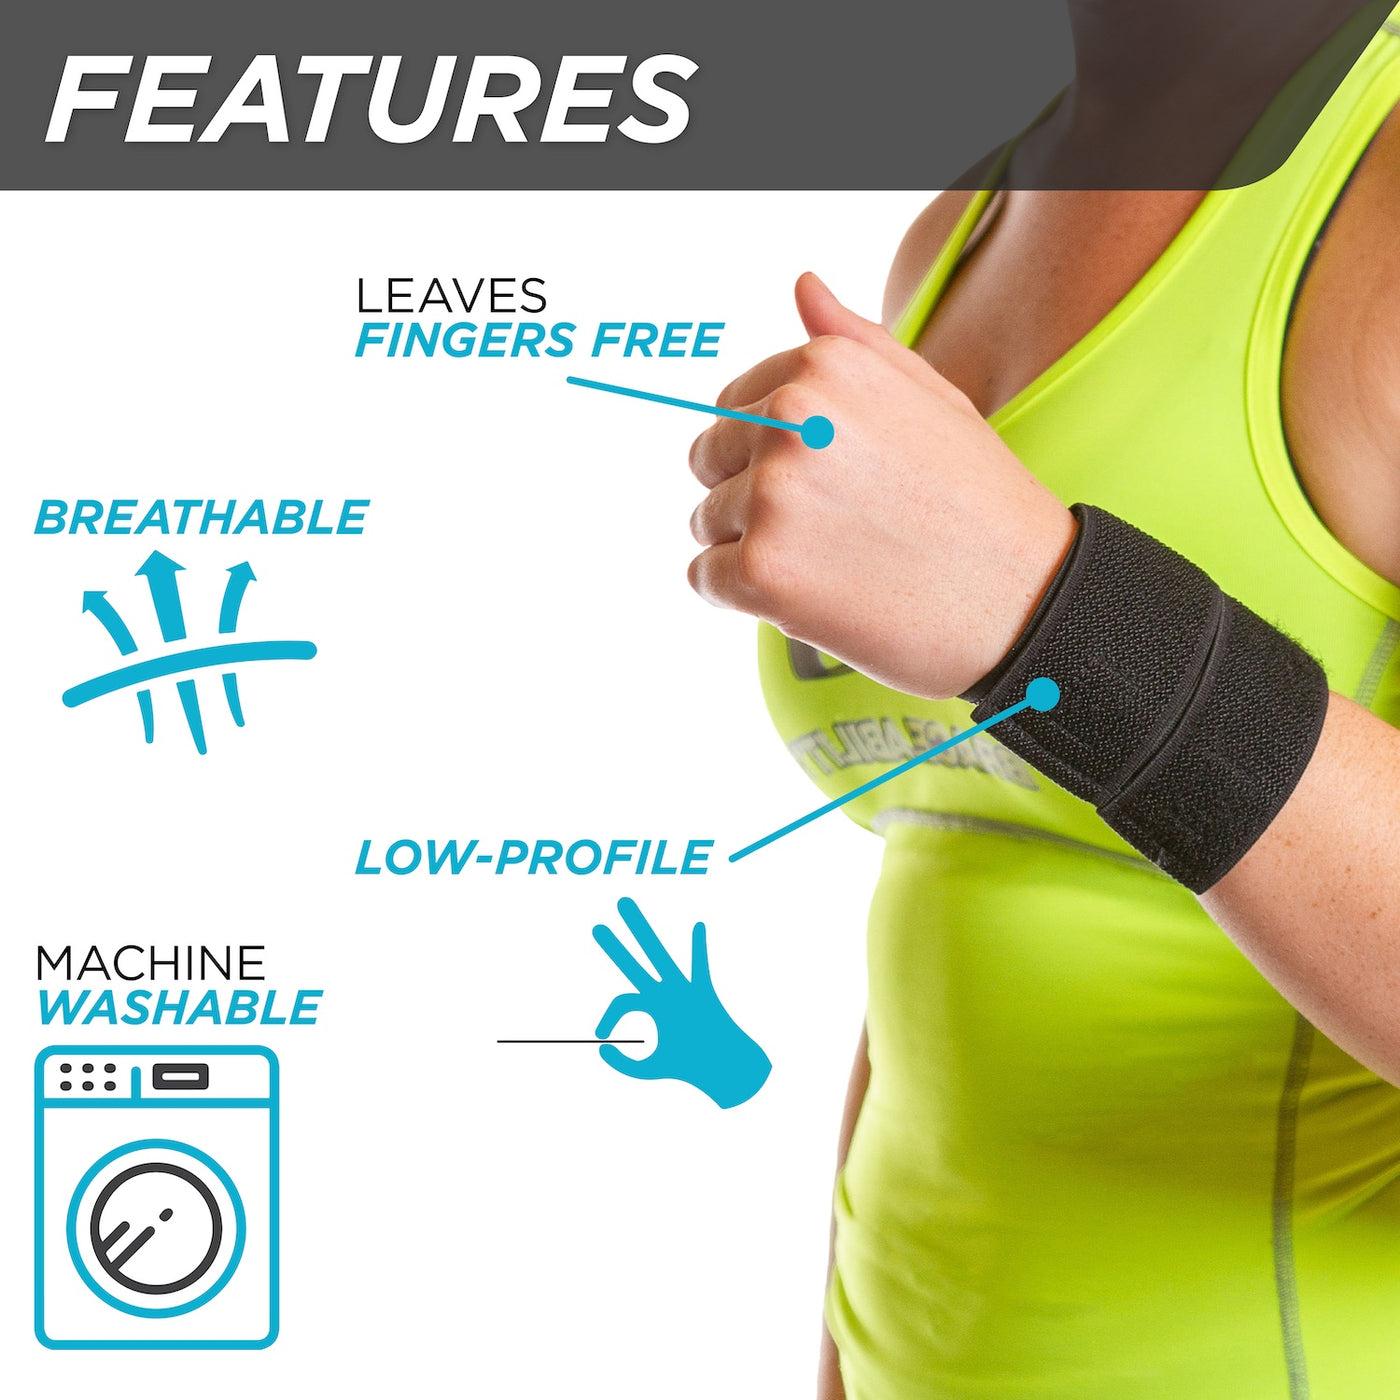 Thanks to its low-profile design the cheerleader wrist support is breathable and leaves your fingers free to use